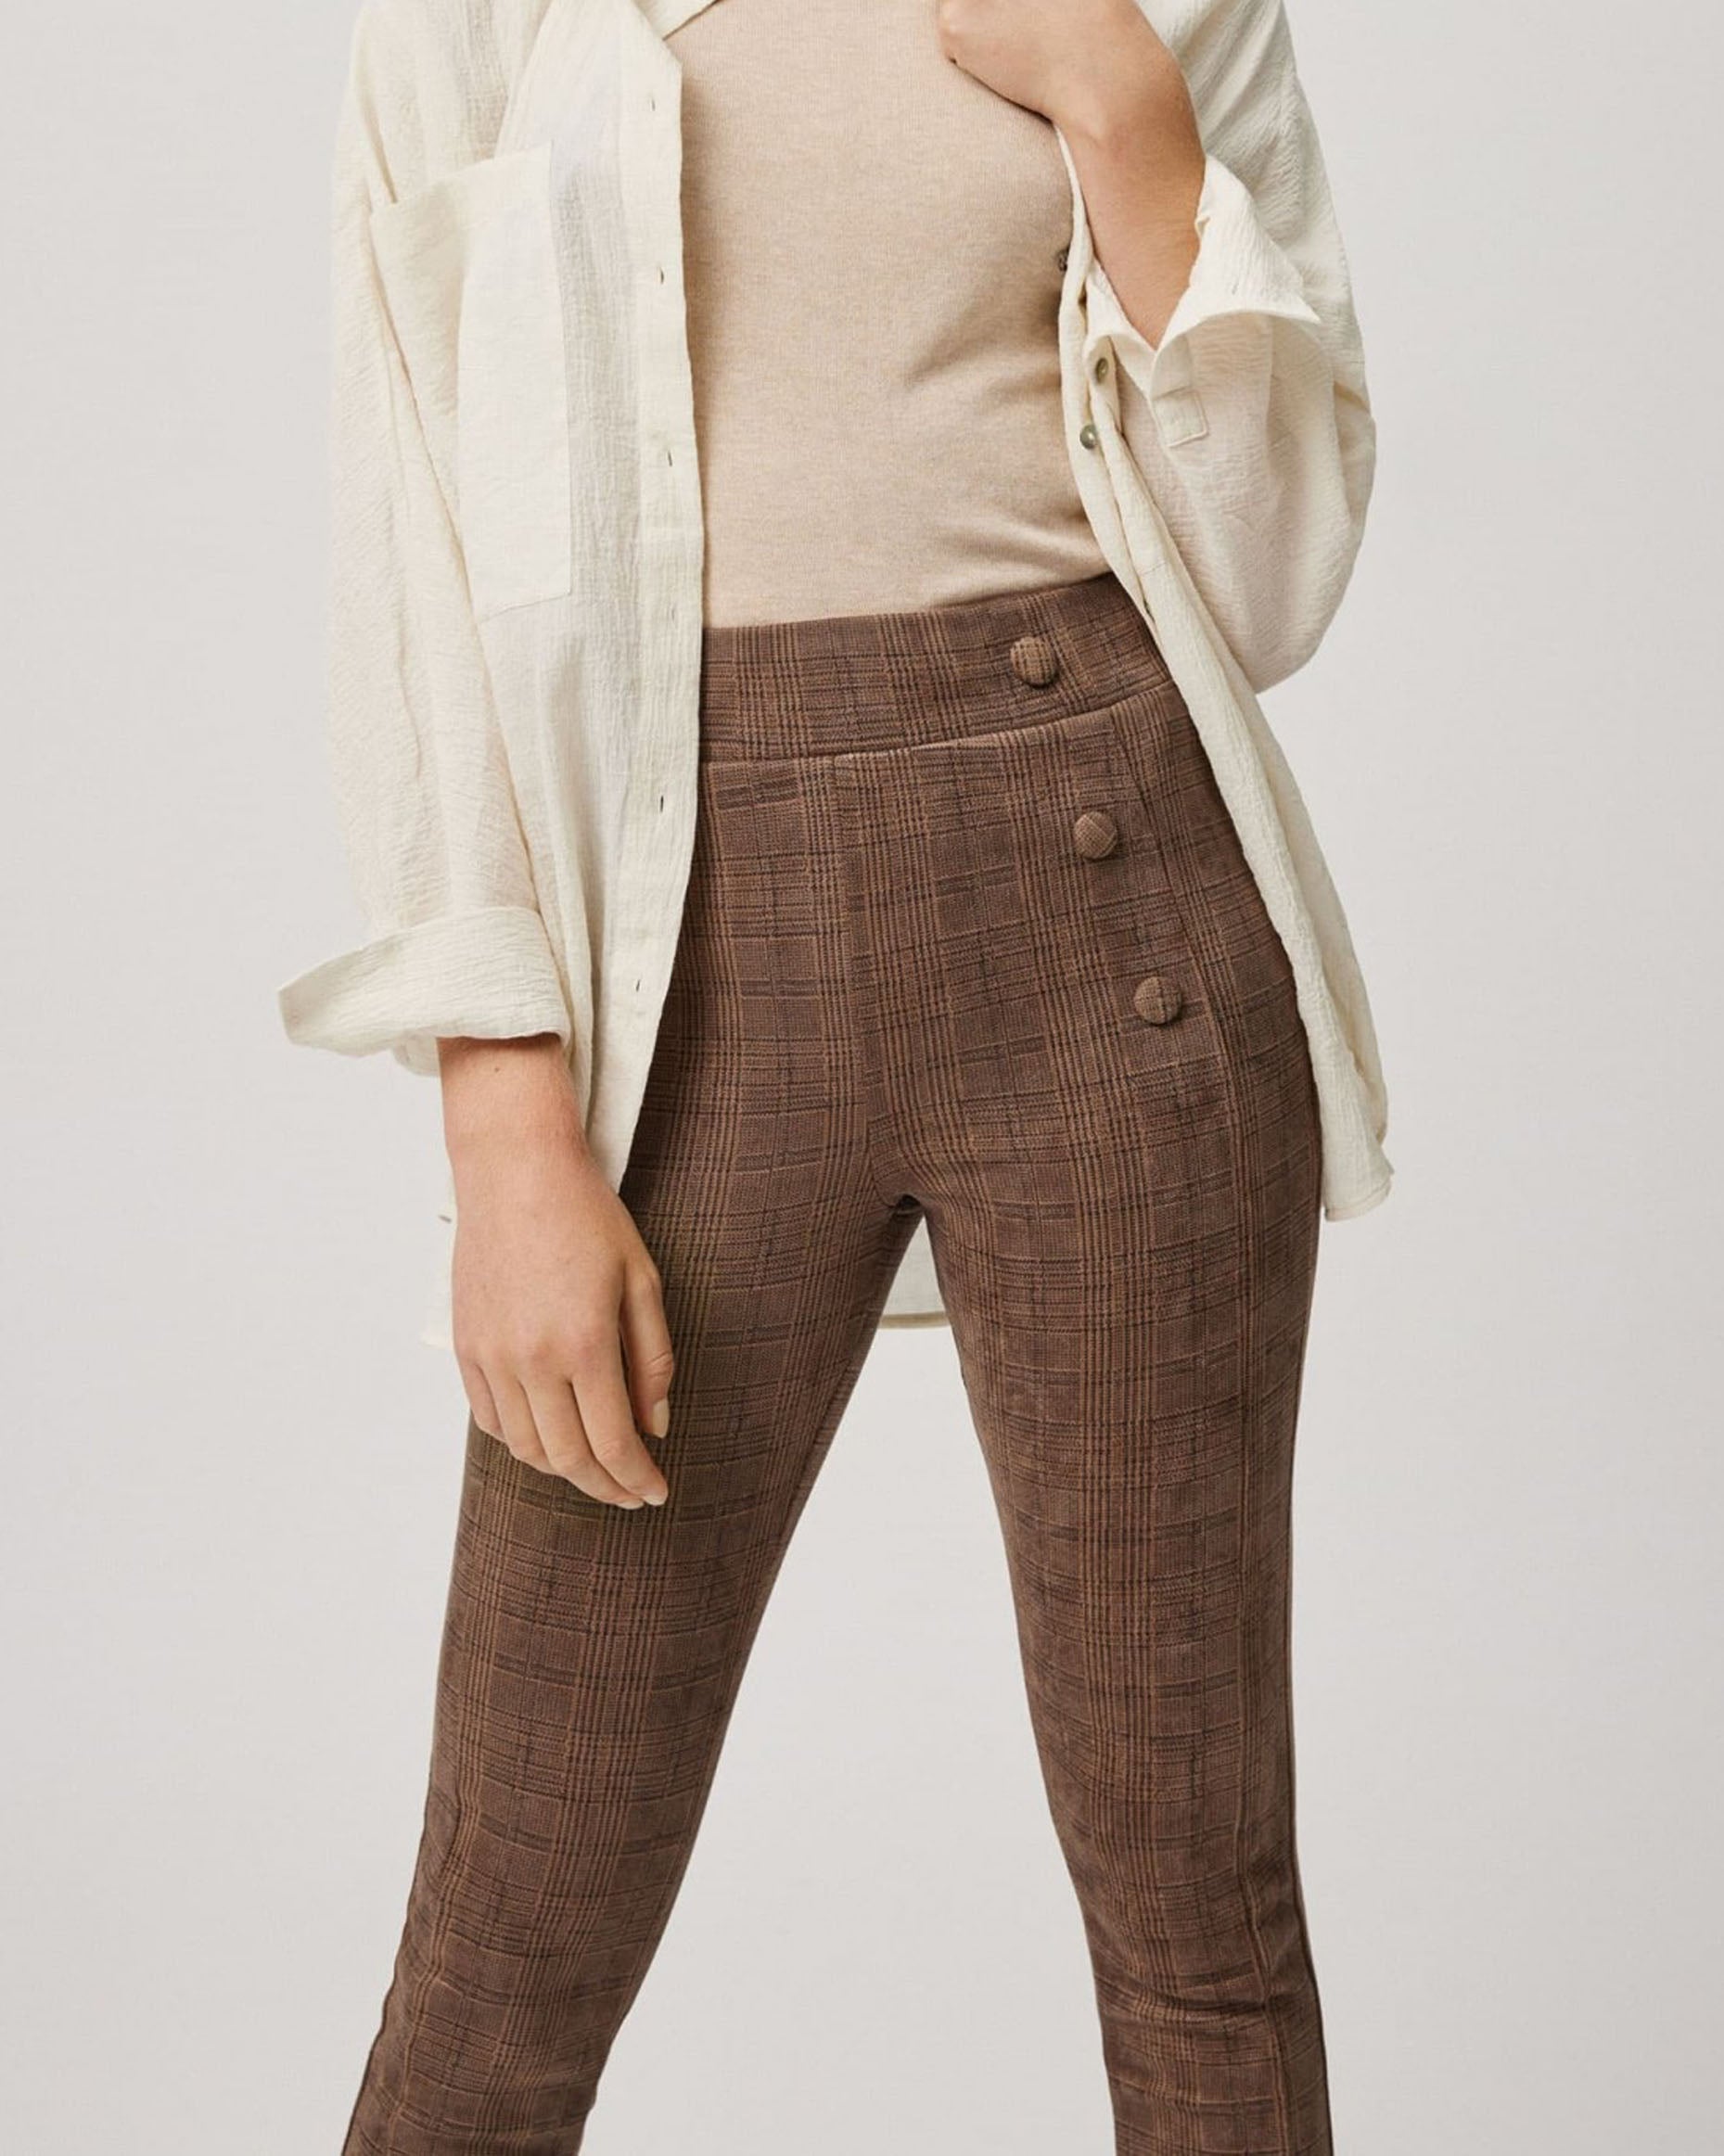 Ysabel Mora 70157 Brown Tartan Leggings - Light brown leggings with faux front pockets with covered buttons on the sides and deep elasticated waistband.